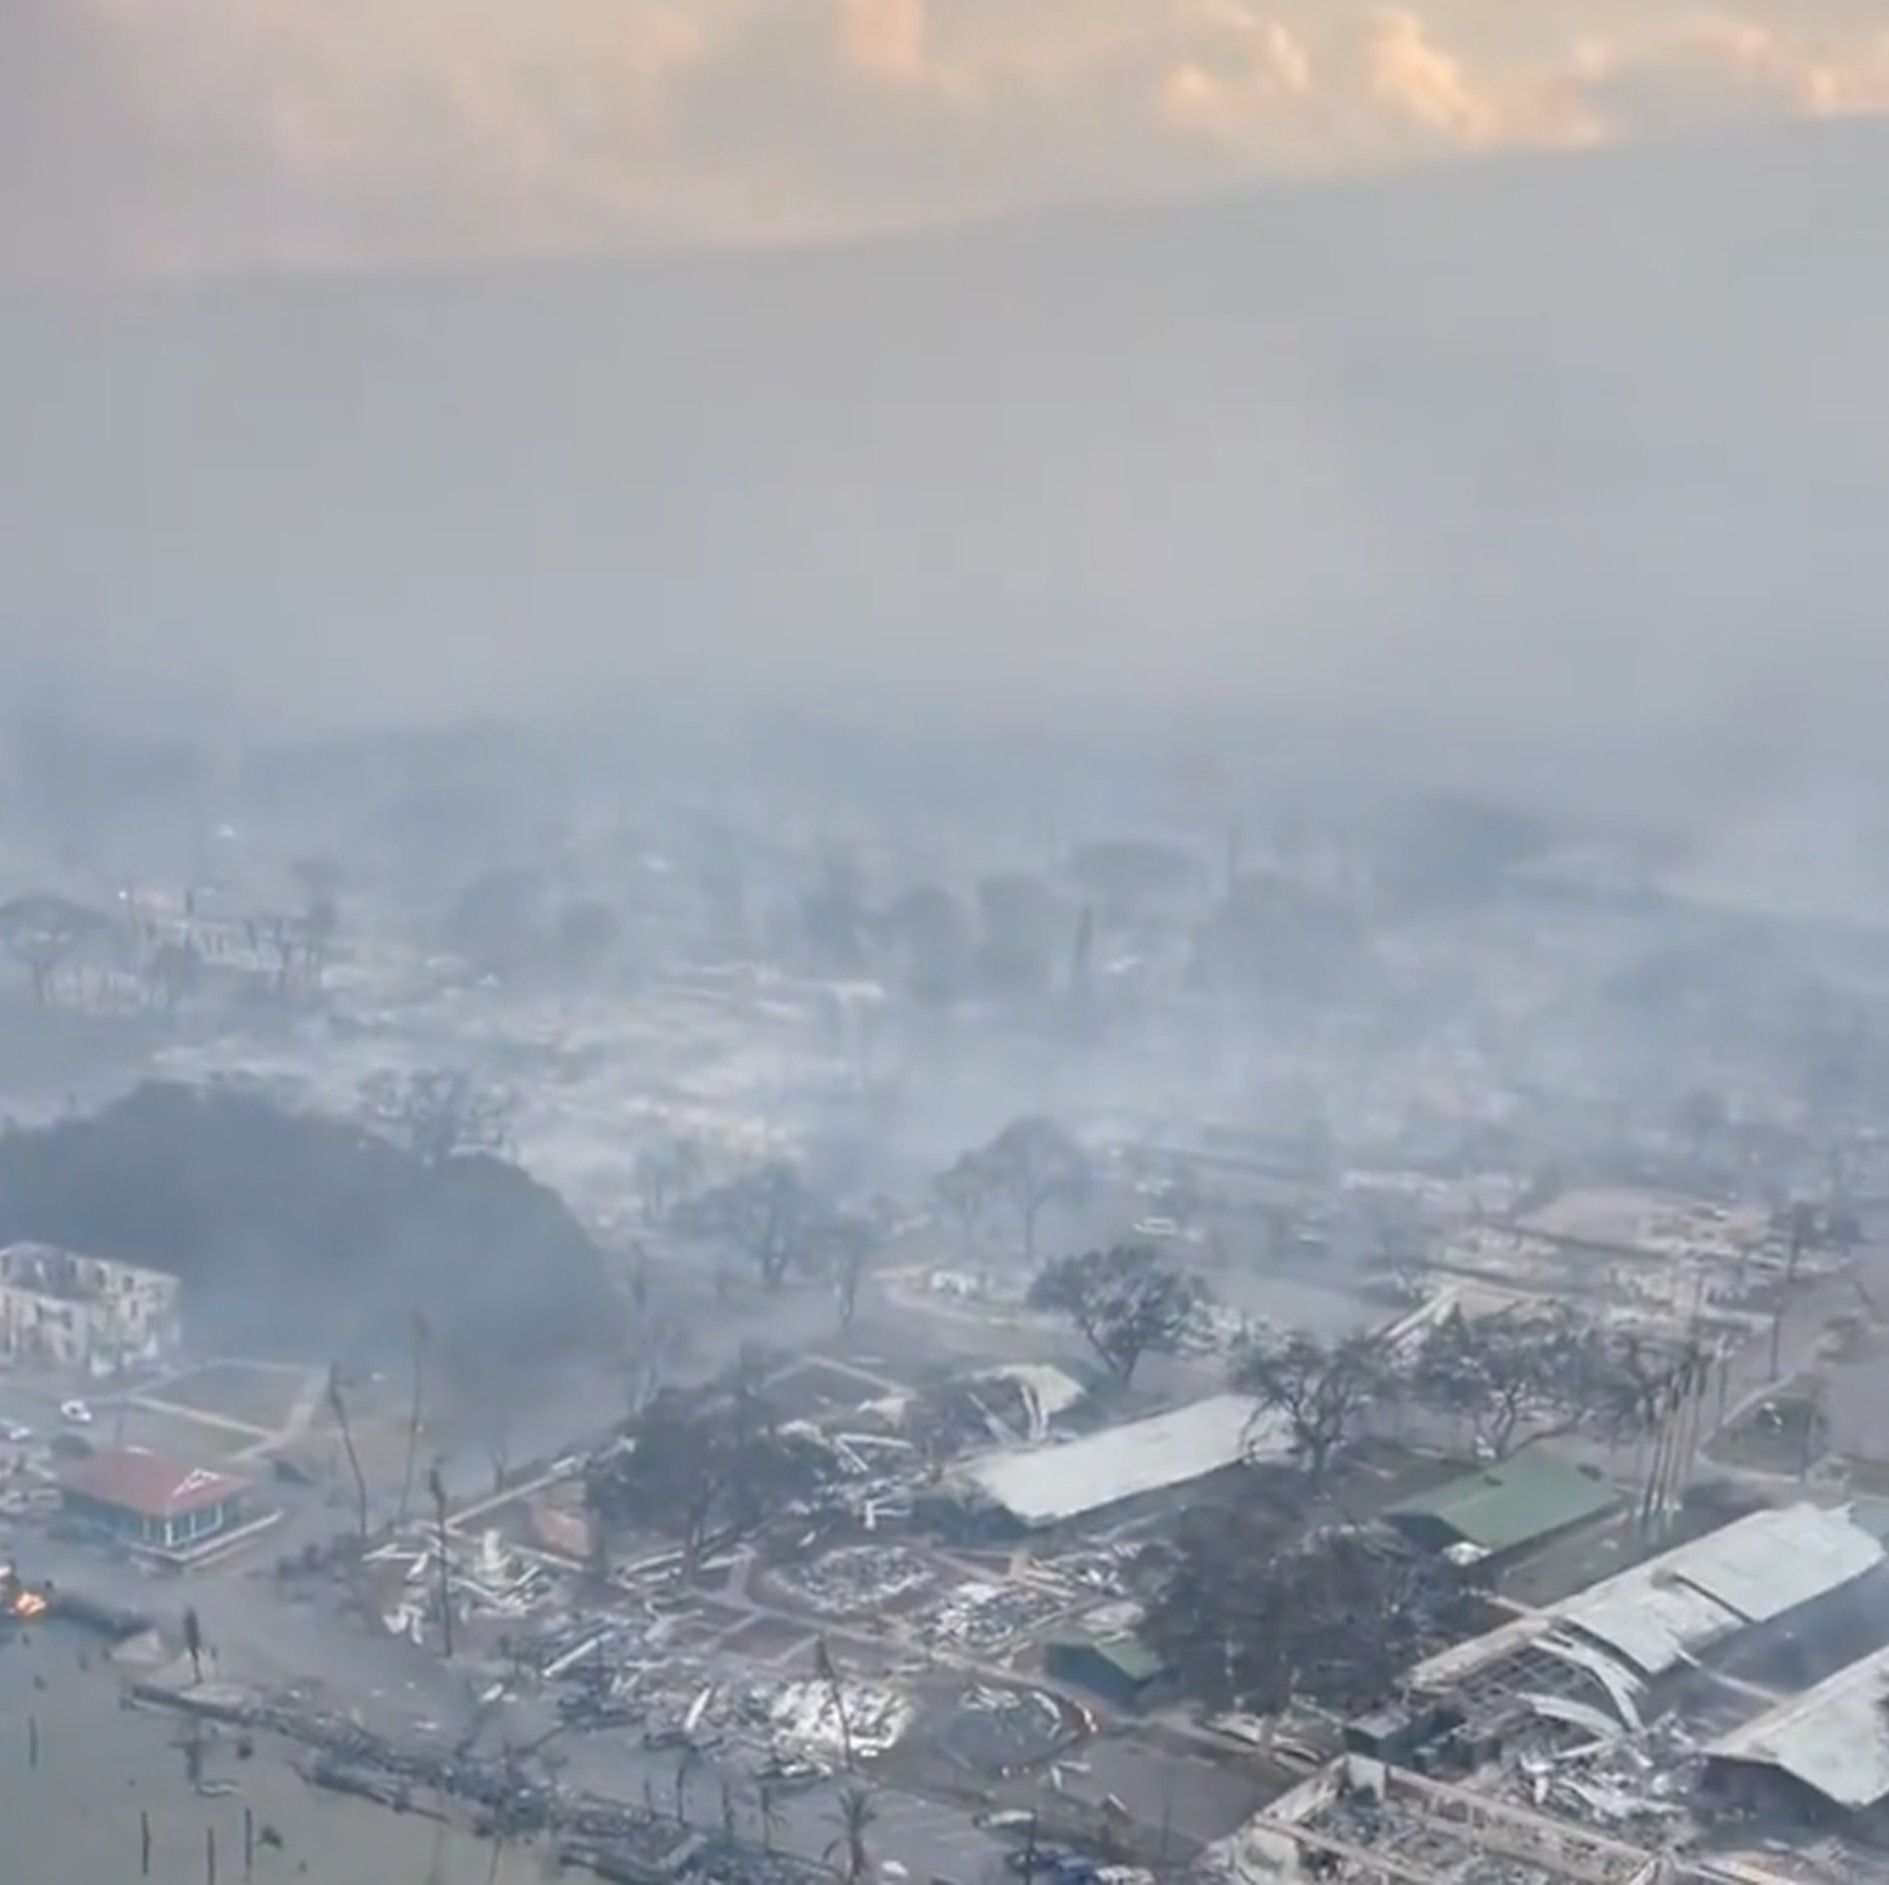 A screenshot showing an aerial view of the devastation from a wildfire in the historic Lahaina town, Hawaii.